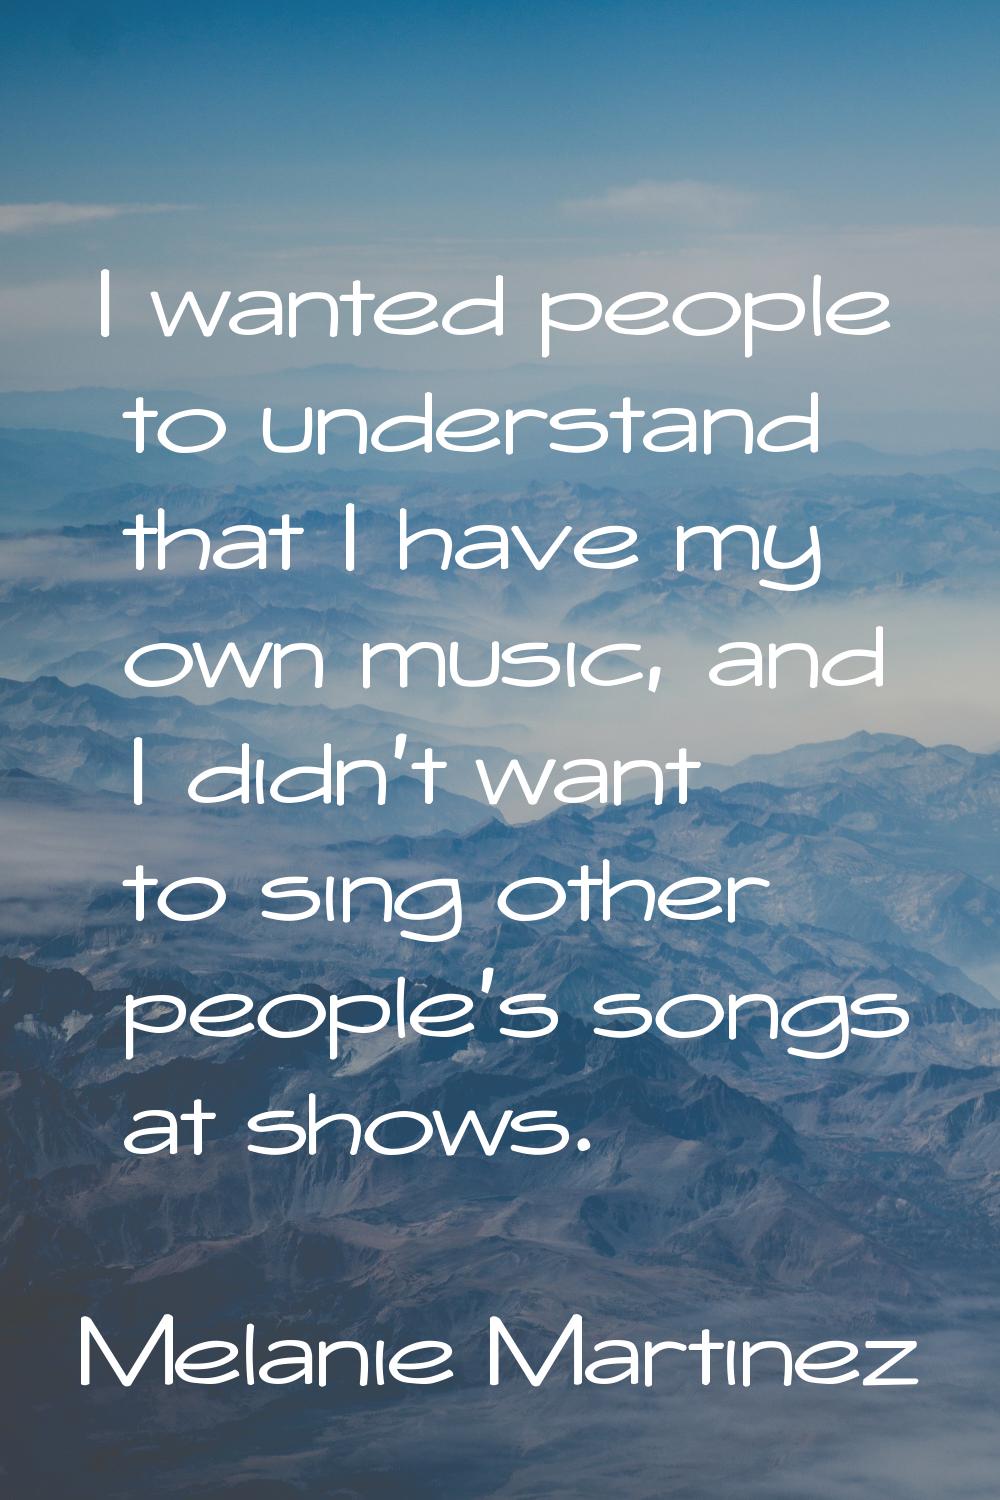 I wanted people to understand that I have my own music, and I didn't want to sing other people's so